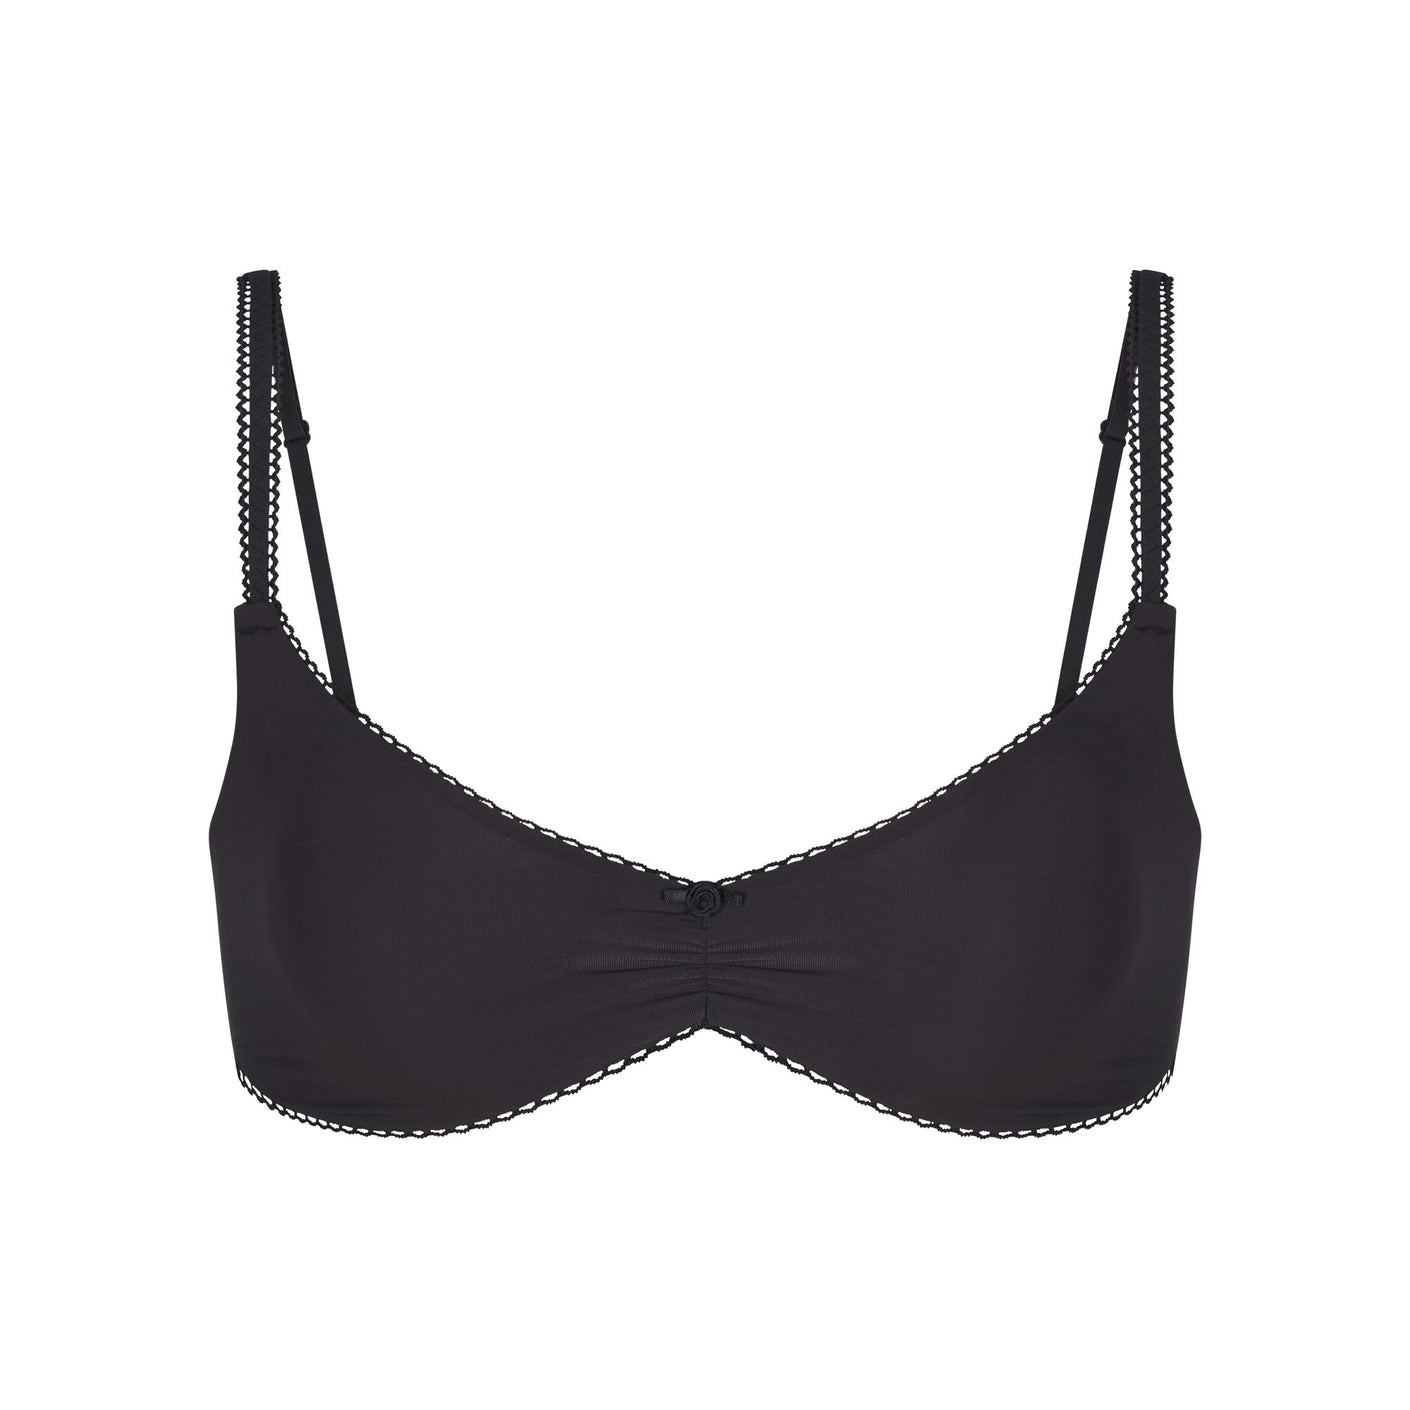 SKIMS Fits Everybody lace-trimmed stretch triangle bralette - Onyx